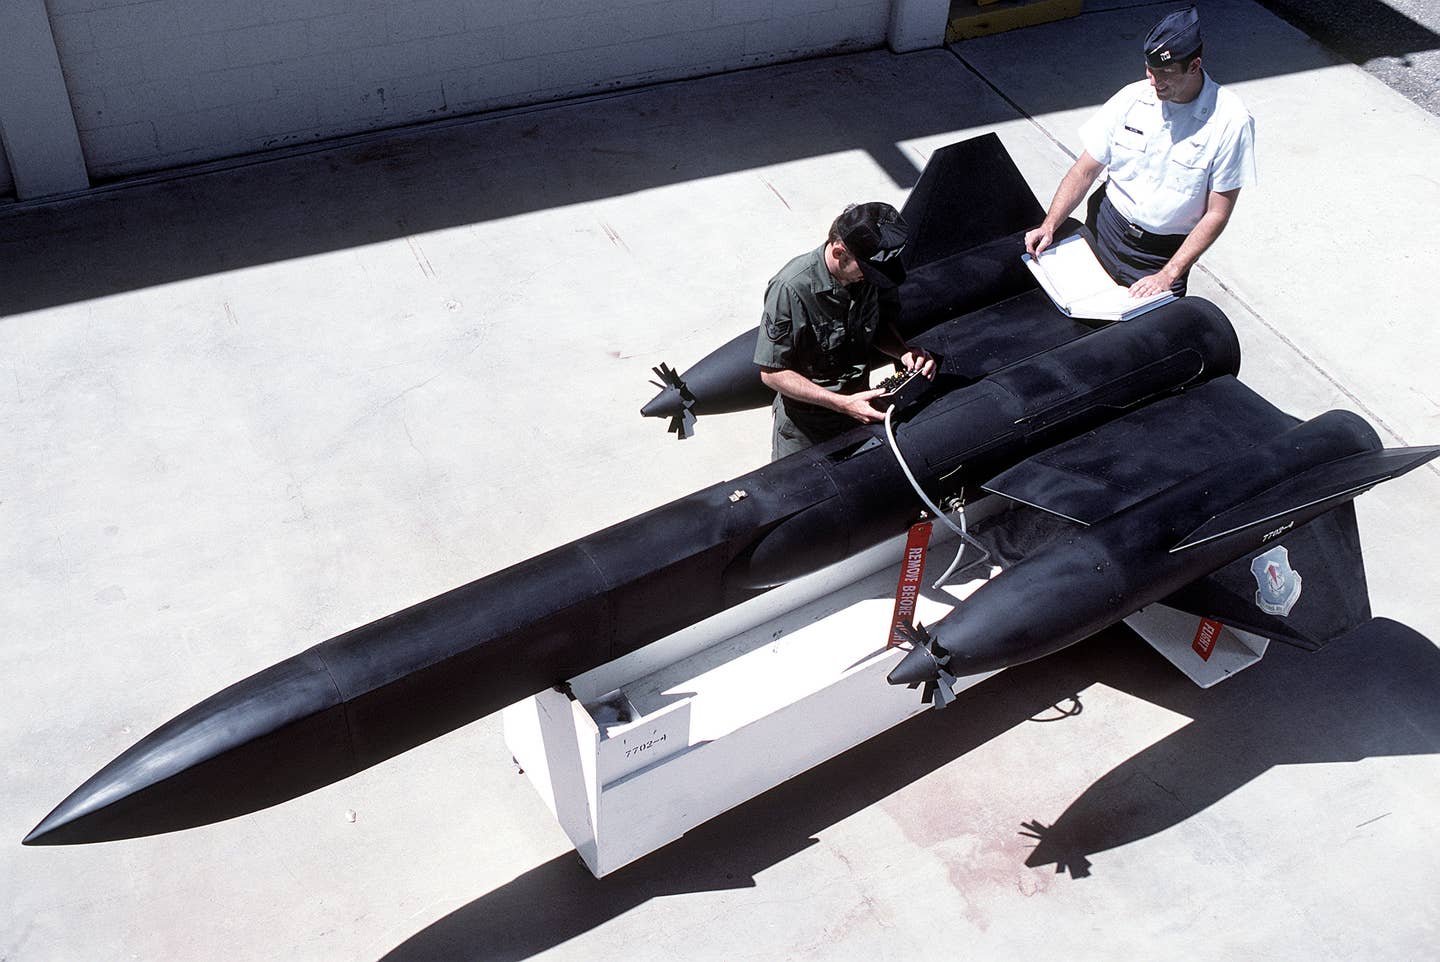 message-editor%2F1619408381602-technicians_with_tow_target_at_kirtland_afb_1980.jpeg